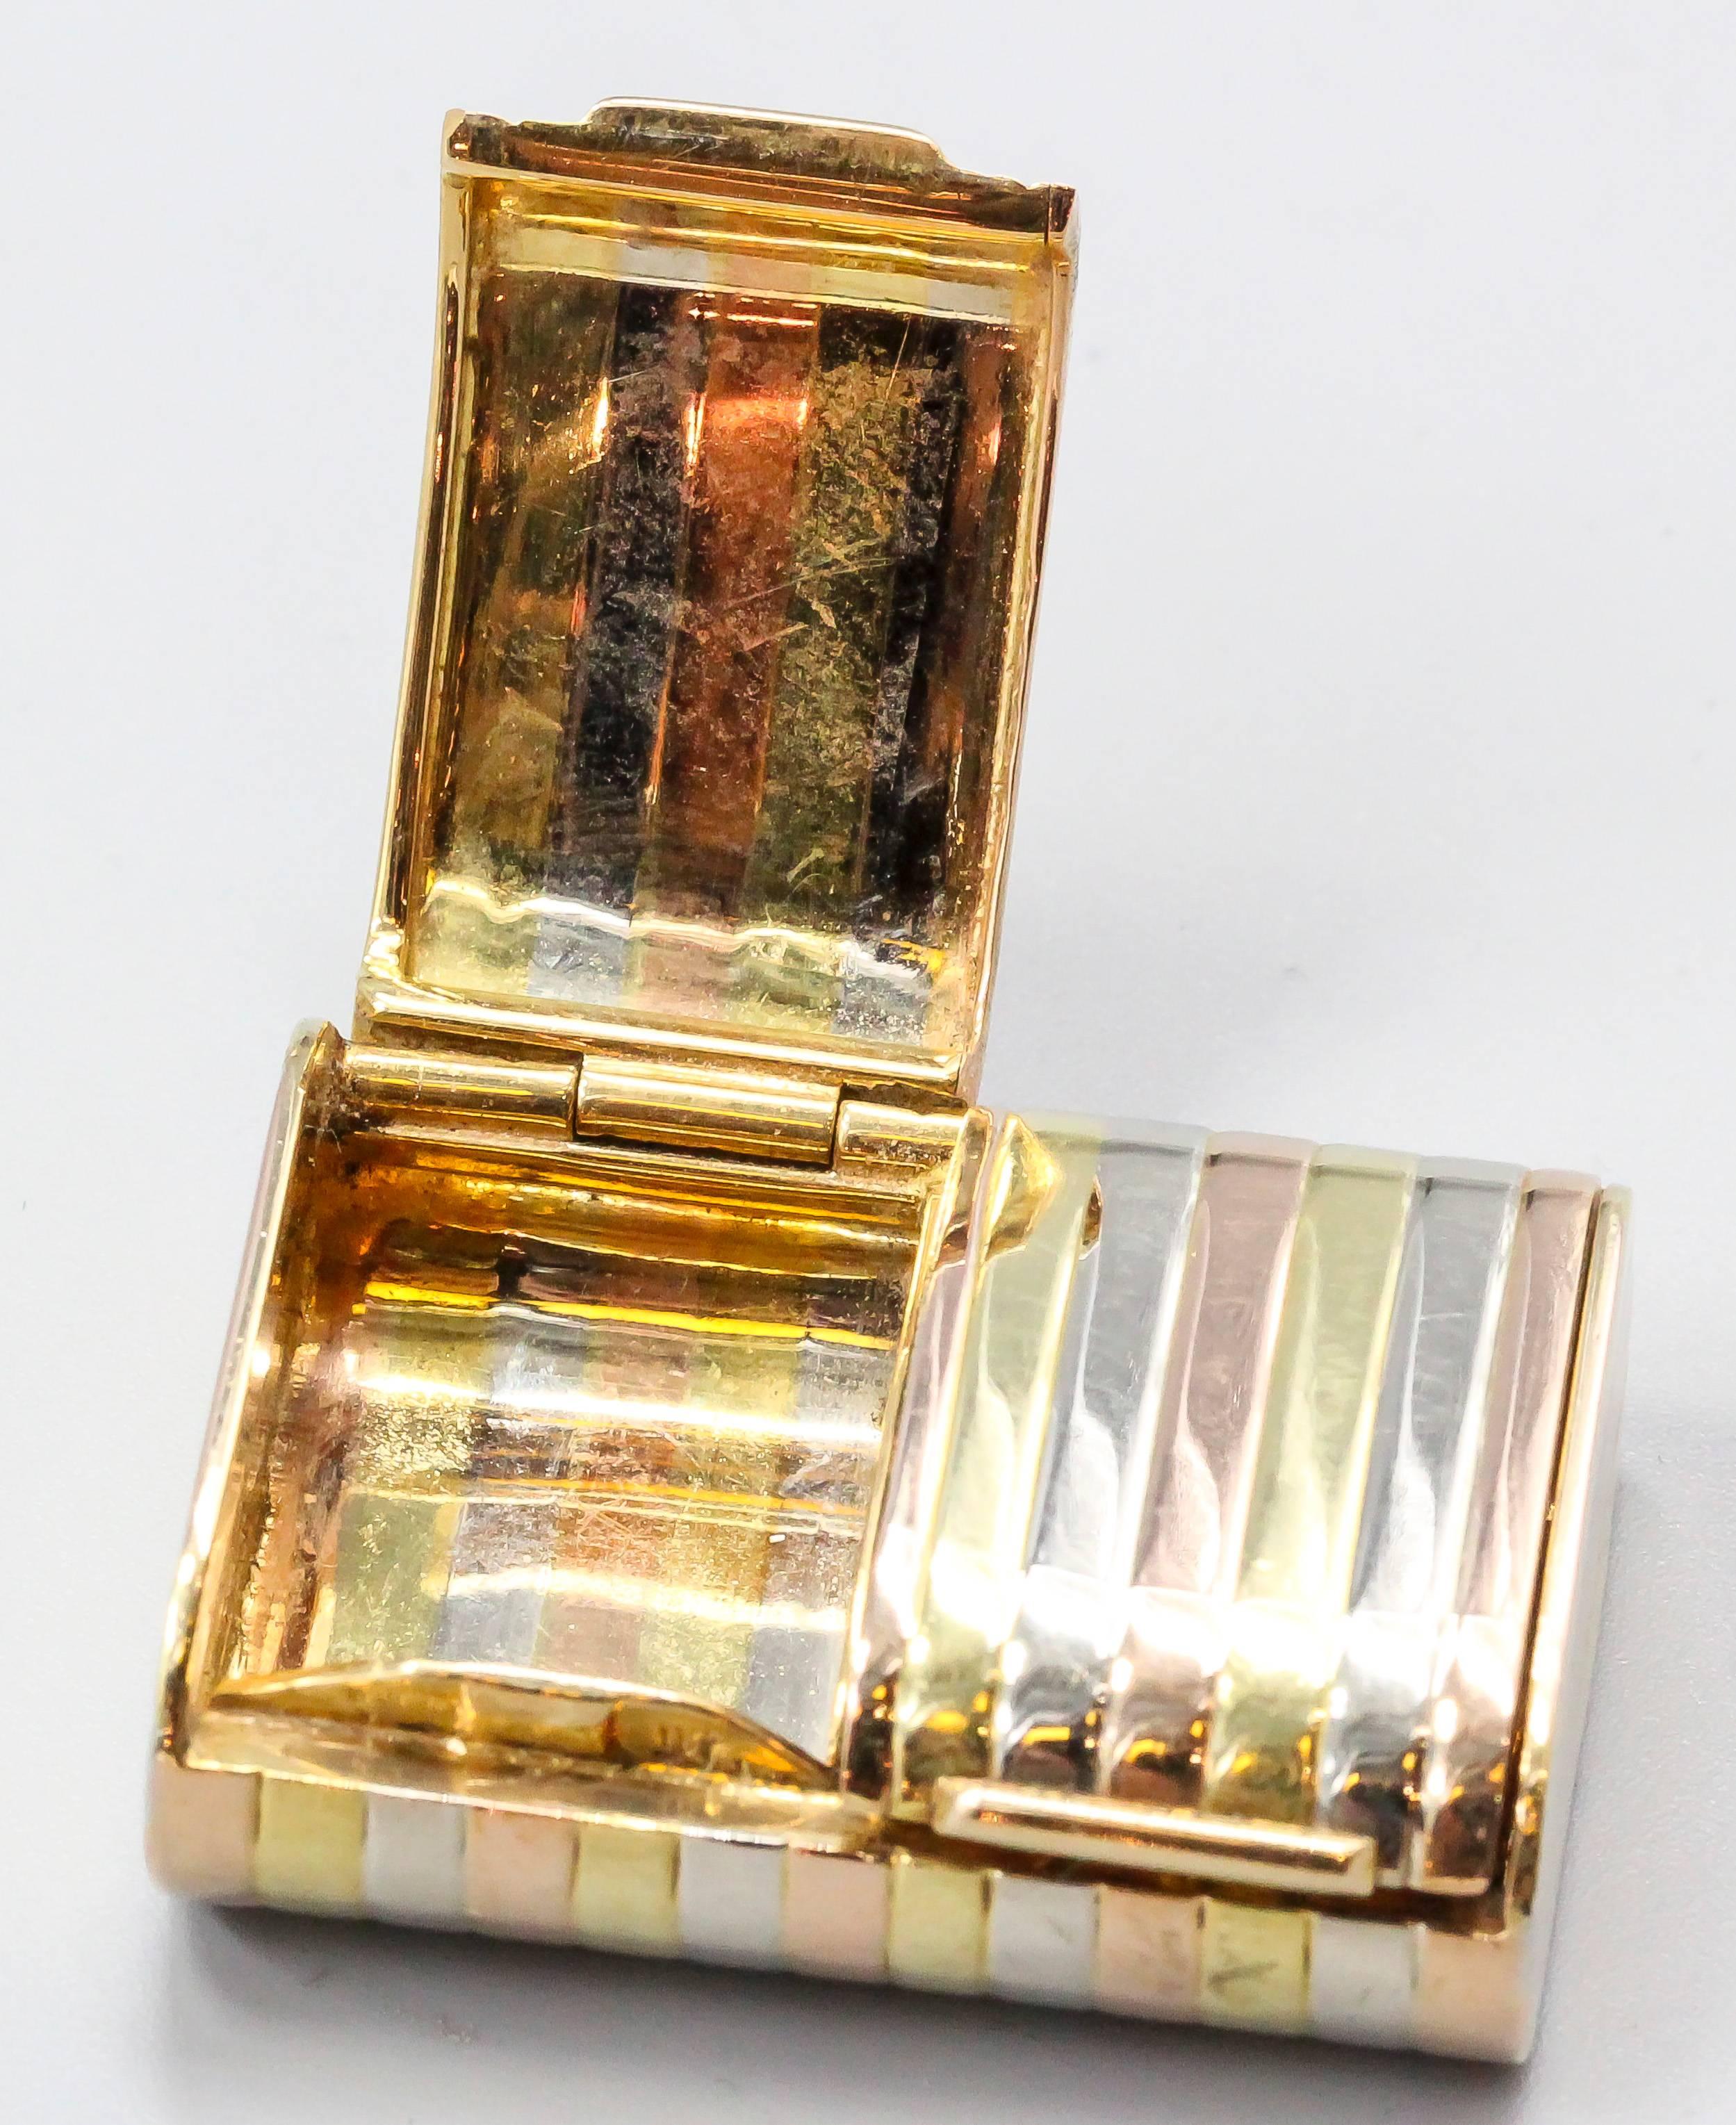 Elegant 18K yellow, white and rose gold pill box. It features two compartments. Beautifully made with a ribbed design.

Hallmarks: 18K.